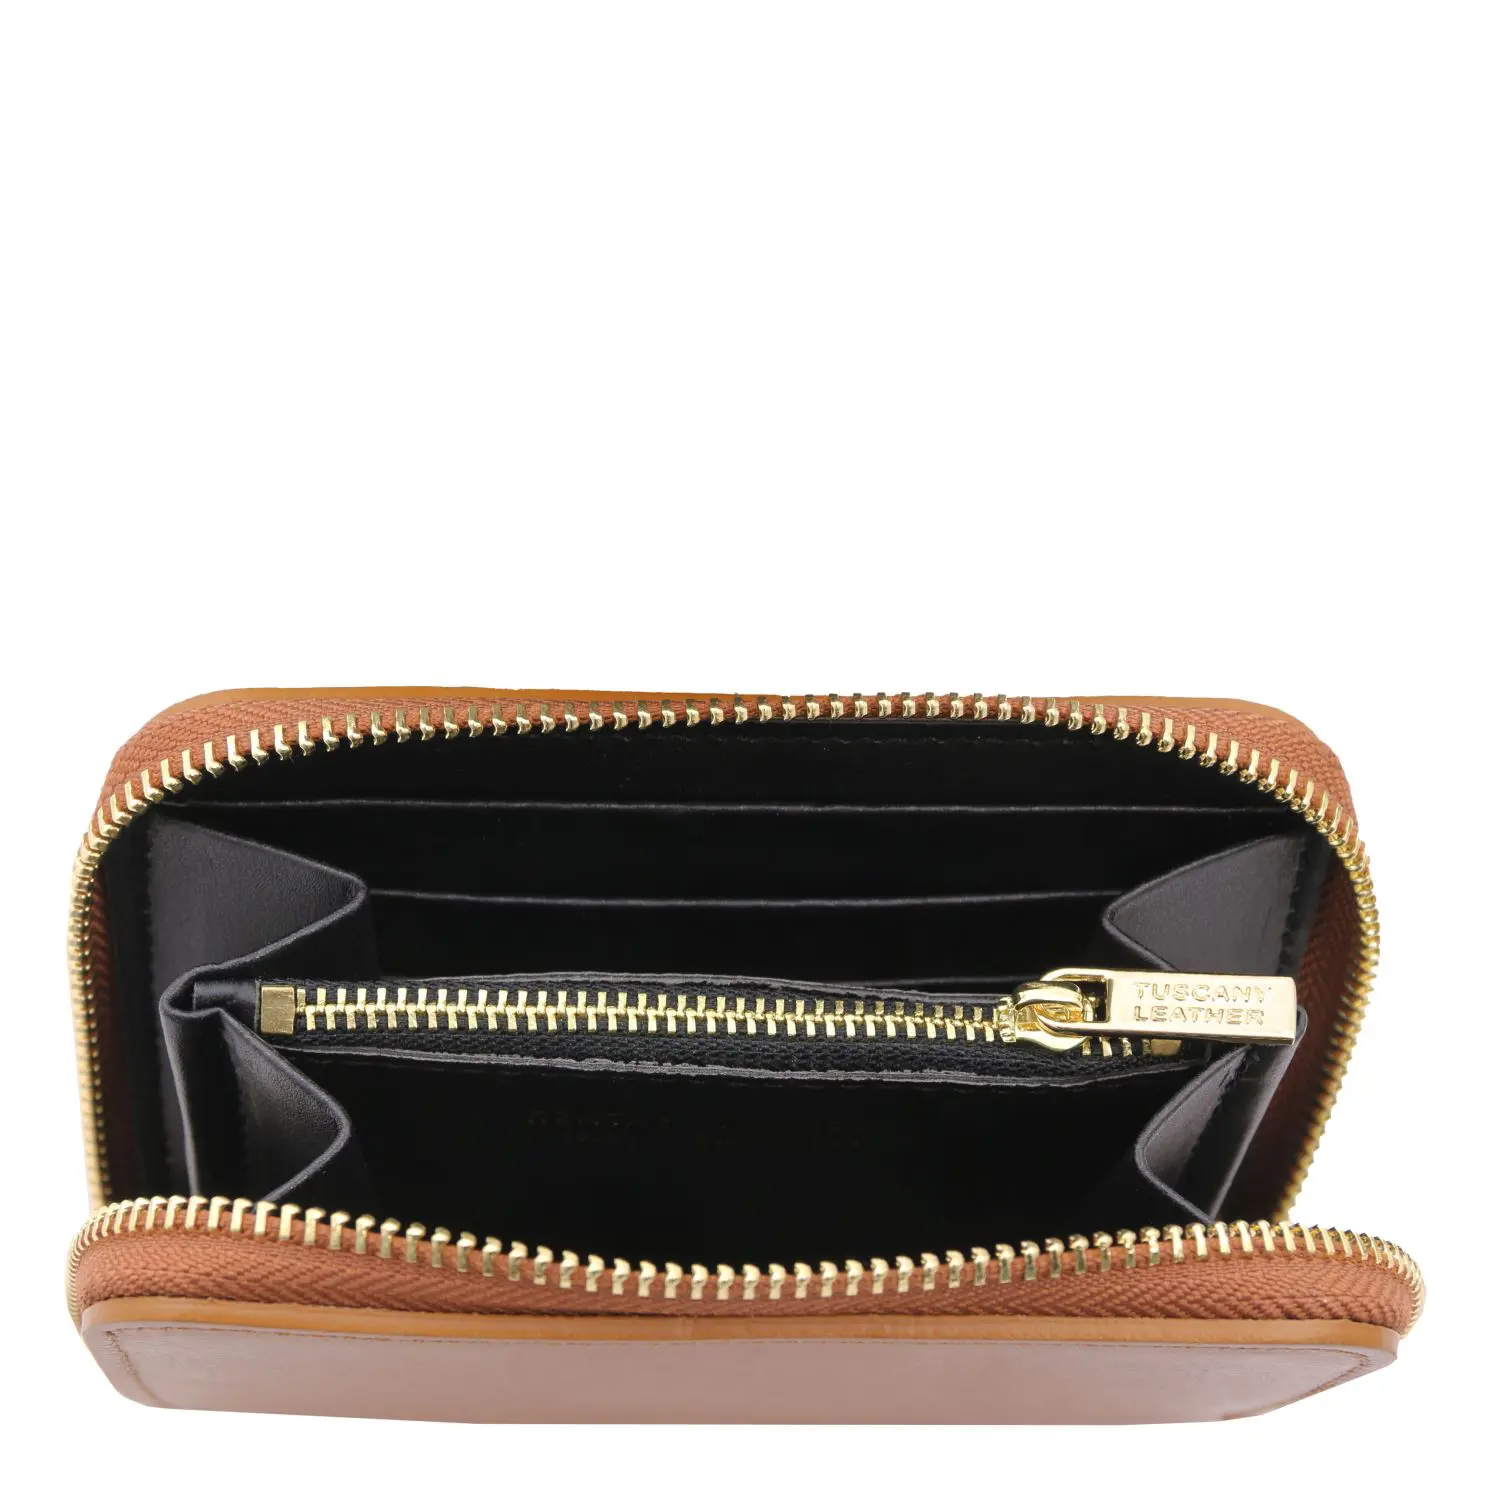 Small Leather Zip Wallet - Leda - Domini Leather